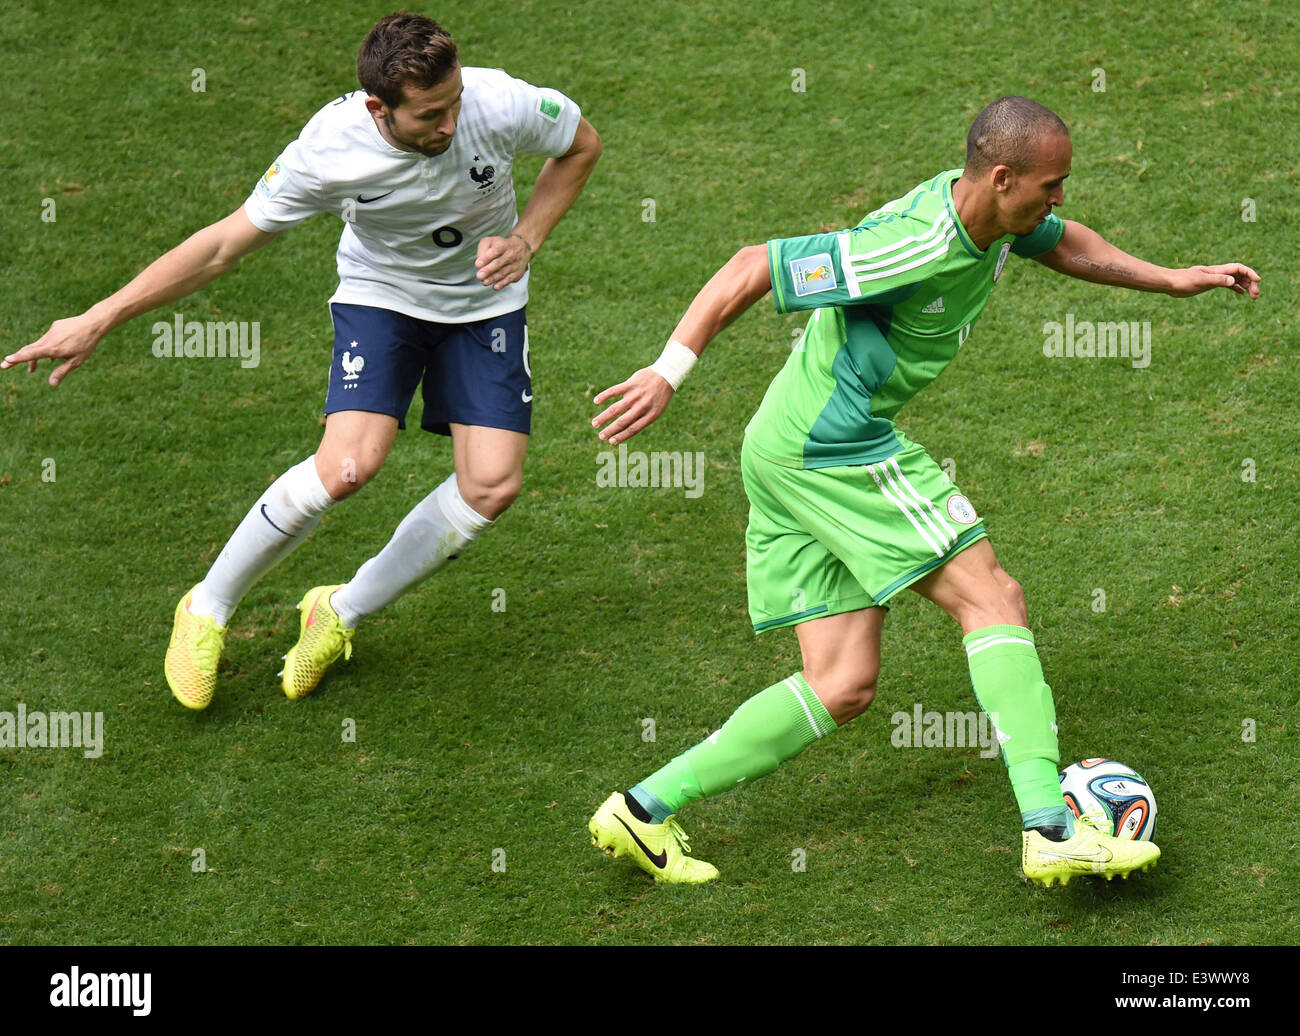 Brasilia, Brazil. 30th June, 2014. France's Yohan Cabaye (L) vies with Nigeria's Peter Osaze Odemwingie during a Round of 16 match between France and Nigeria of 2014 FIFA World Cup at the Estadio Nacional Stadium in Brasilia, Brazil, on June 30, 2014. France won 2-0 over Nigeria and qualified for Quarter-finals here on Monday. Credit:  Liu Dawei/Xinhua/Alamy Live News Stock Photo